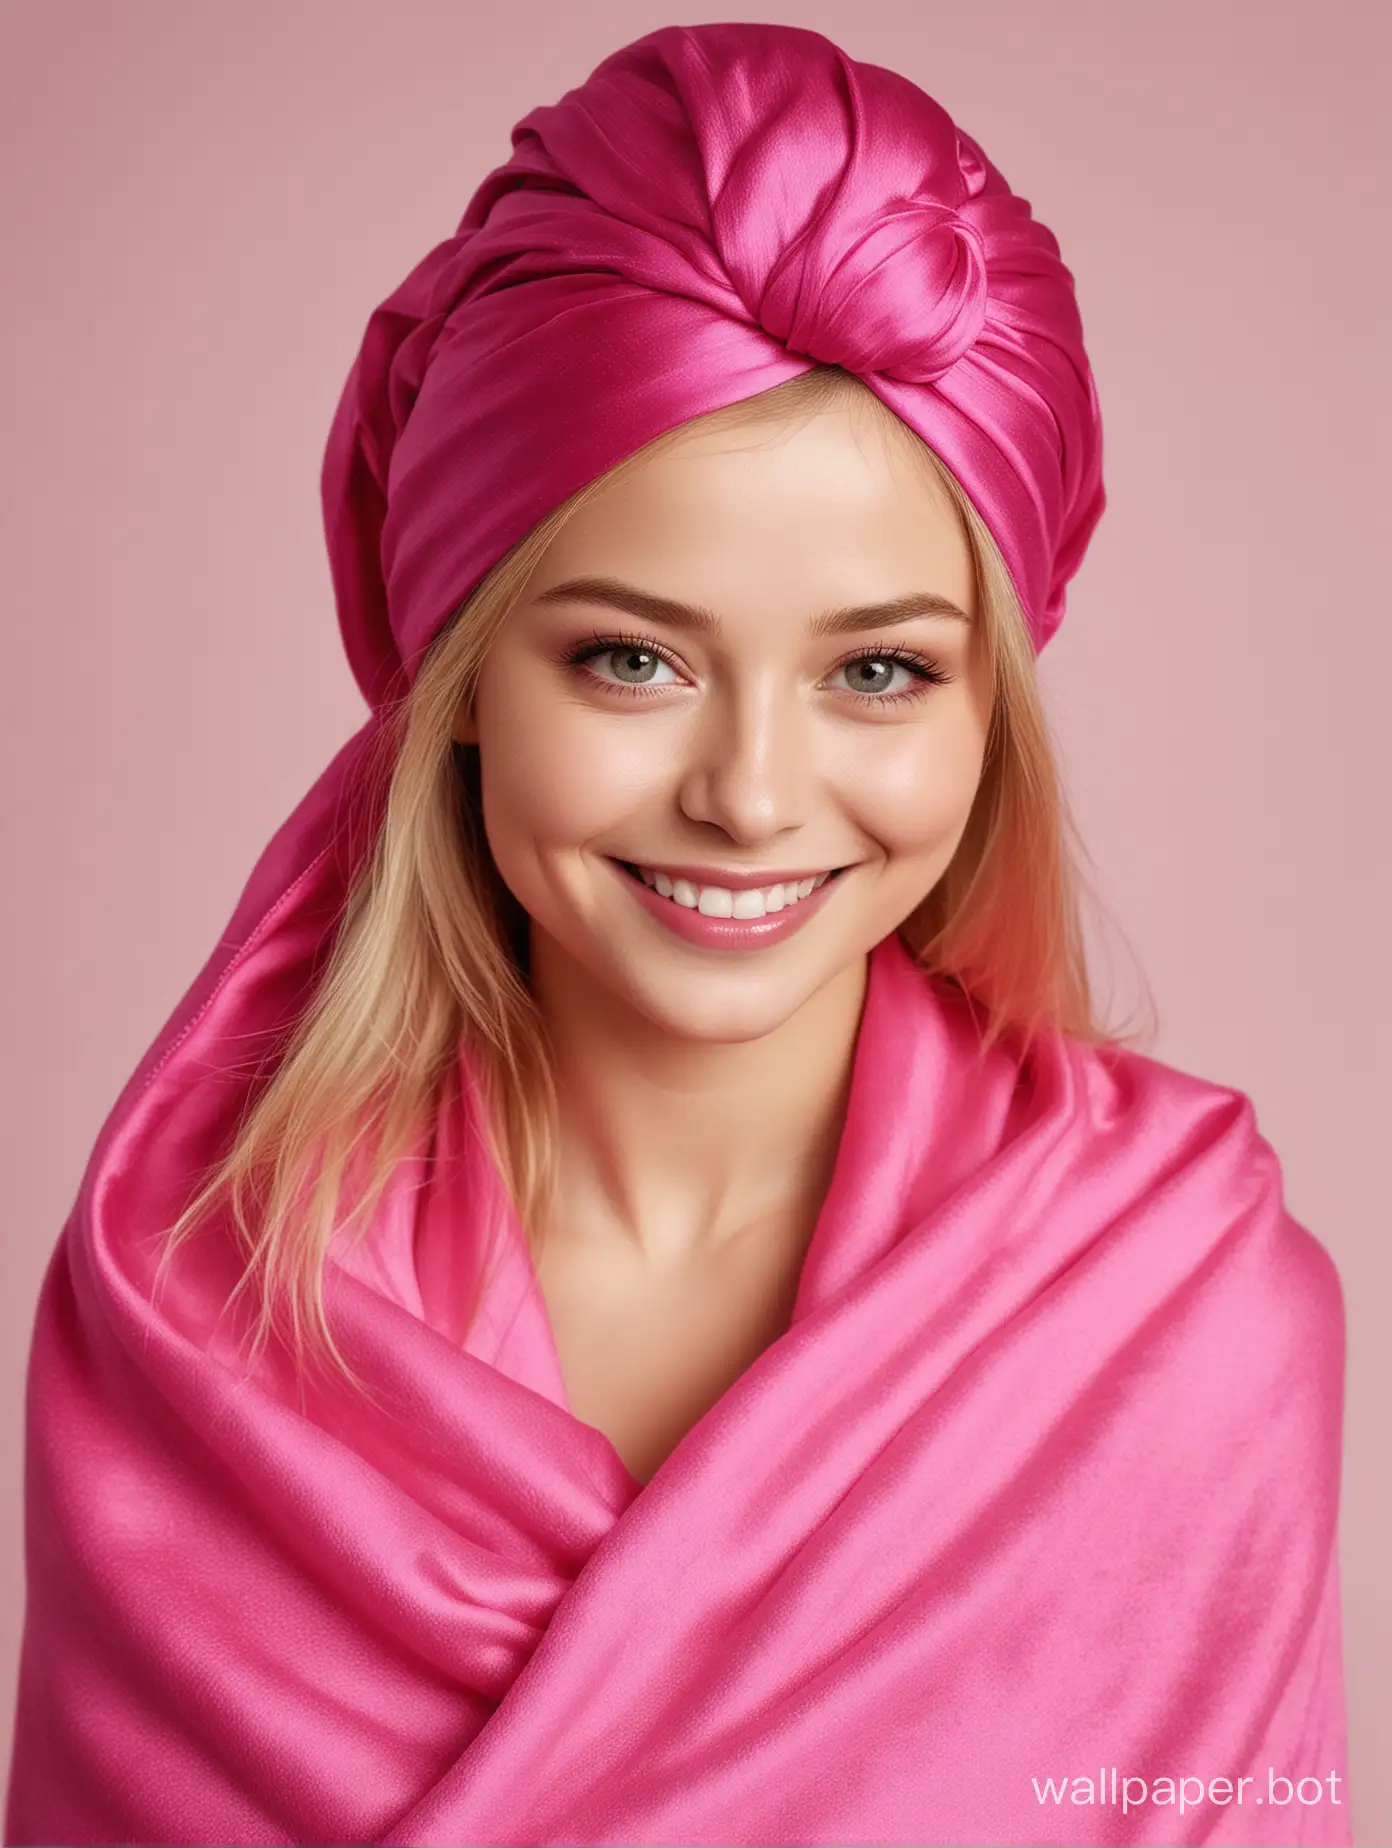 Sweet Yulia Lipnitskaya smiles with long straight silky hair in long Beautiful, gentle, Luxurious glamour natural hot pink fuchsia mulberry silk with pink silk towel turban